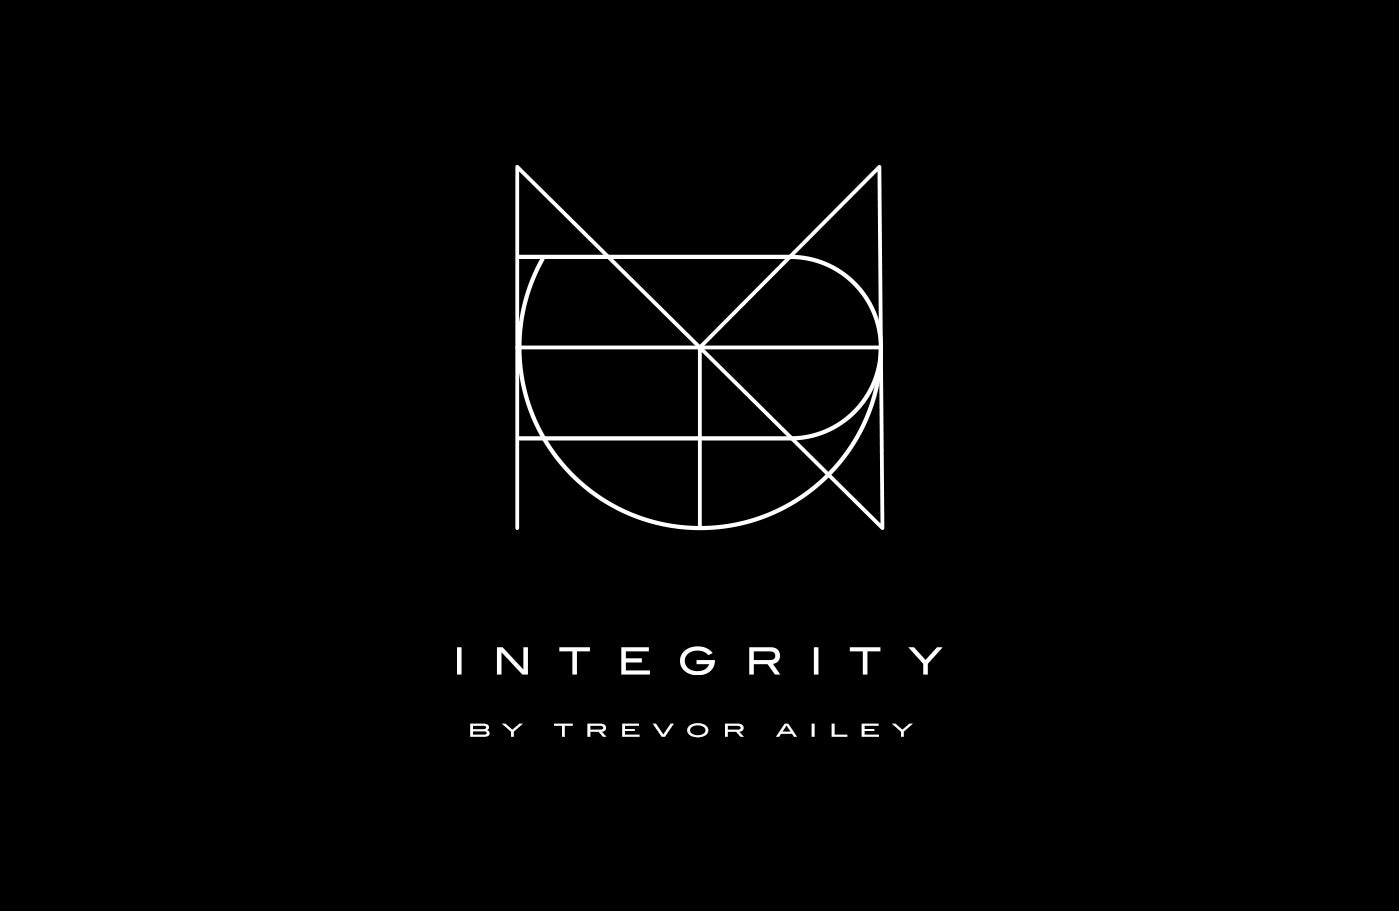 Integrity by Trevor Ailey